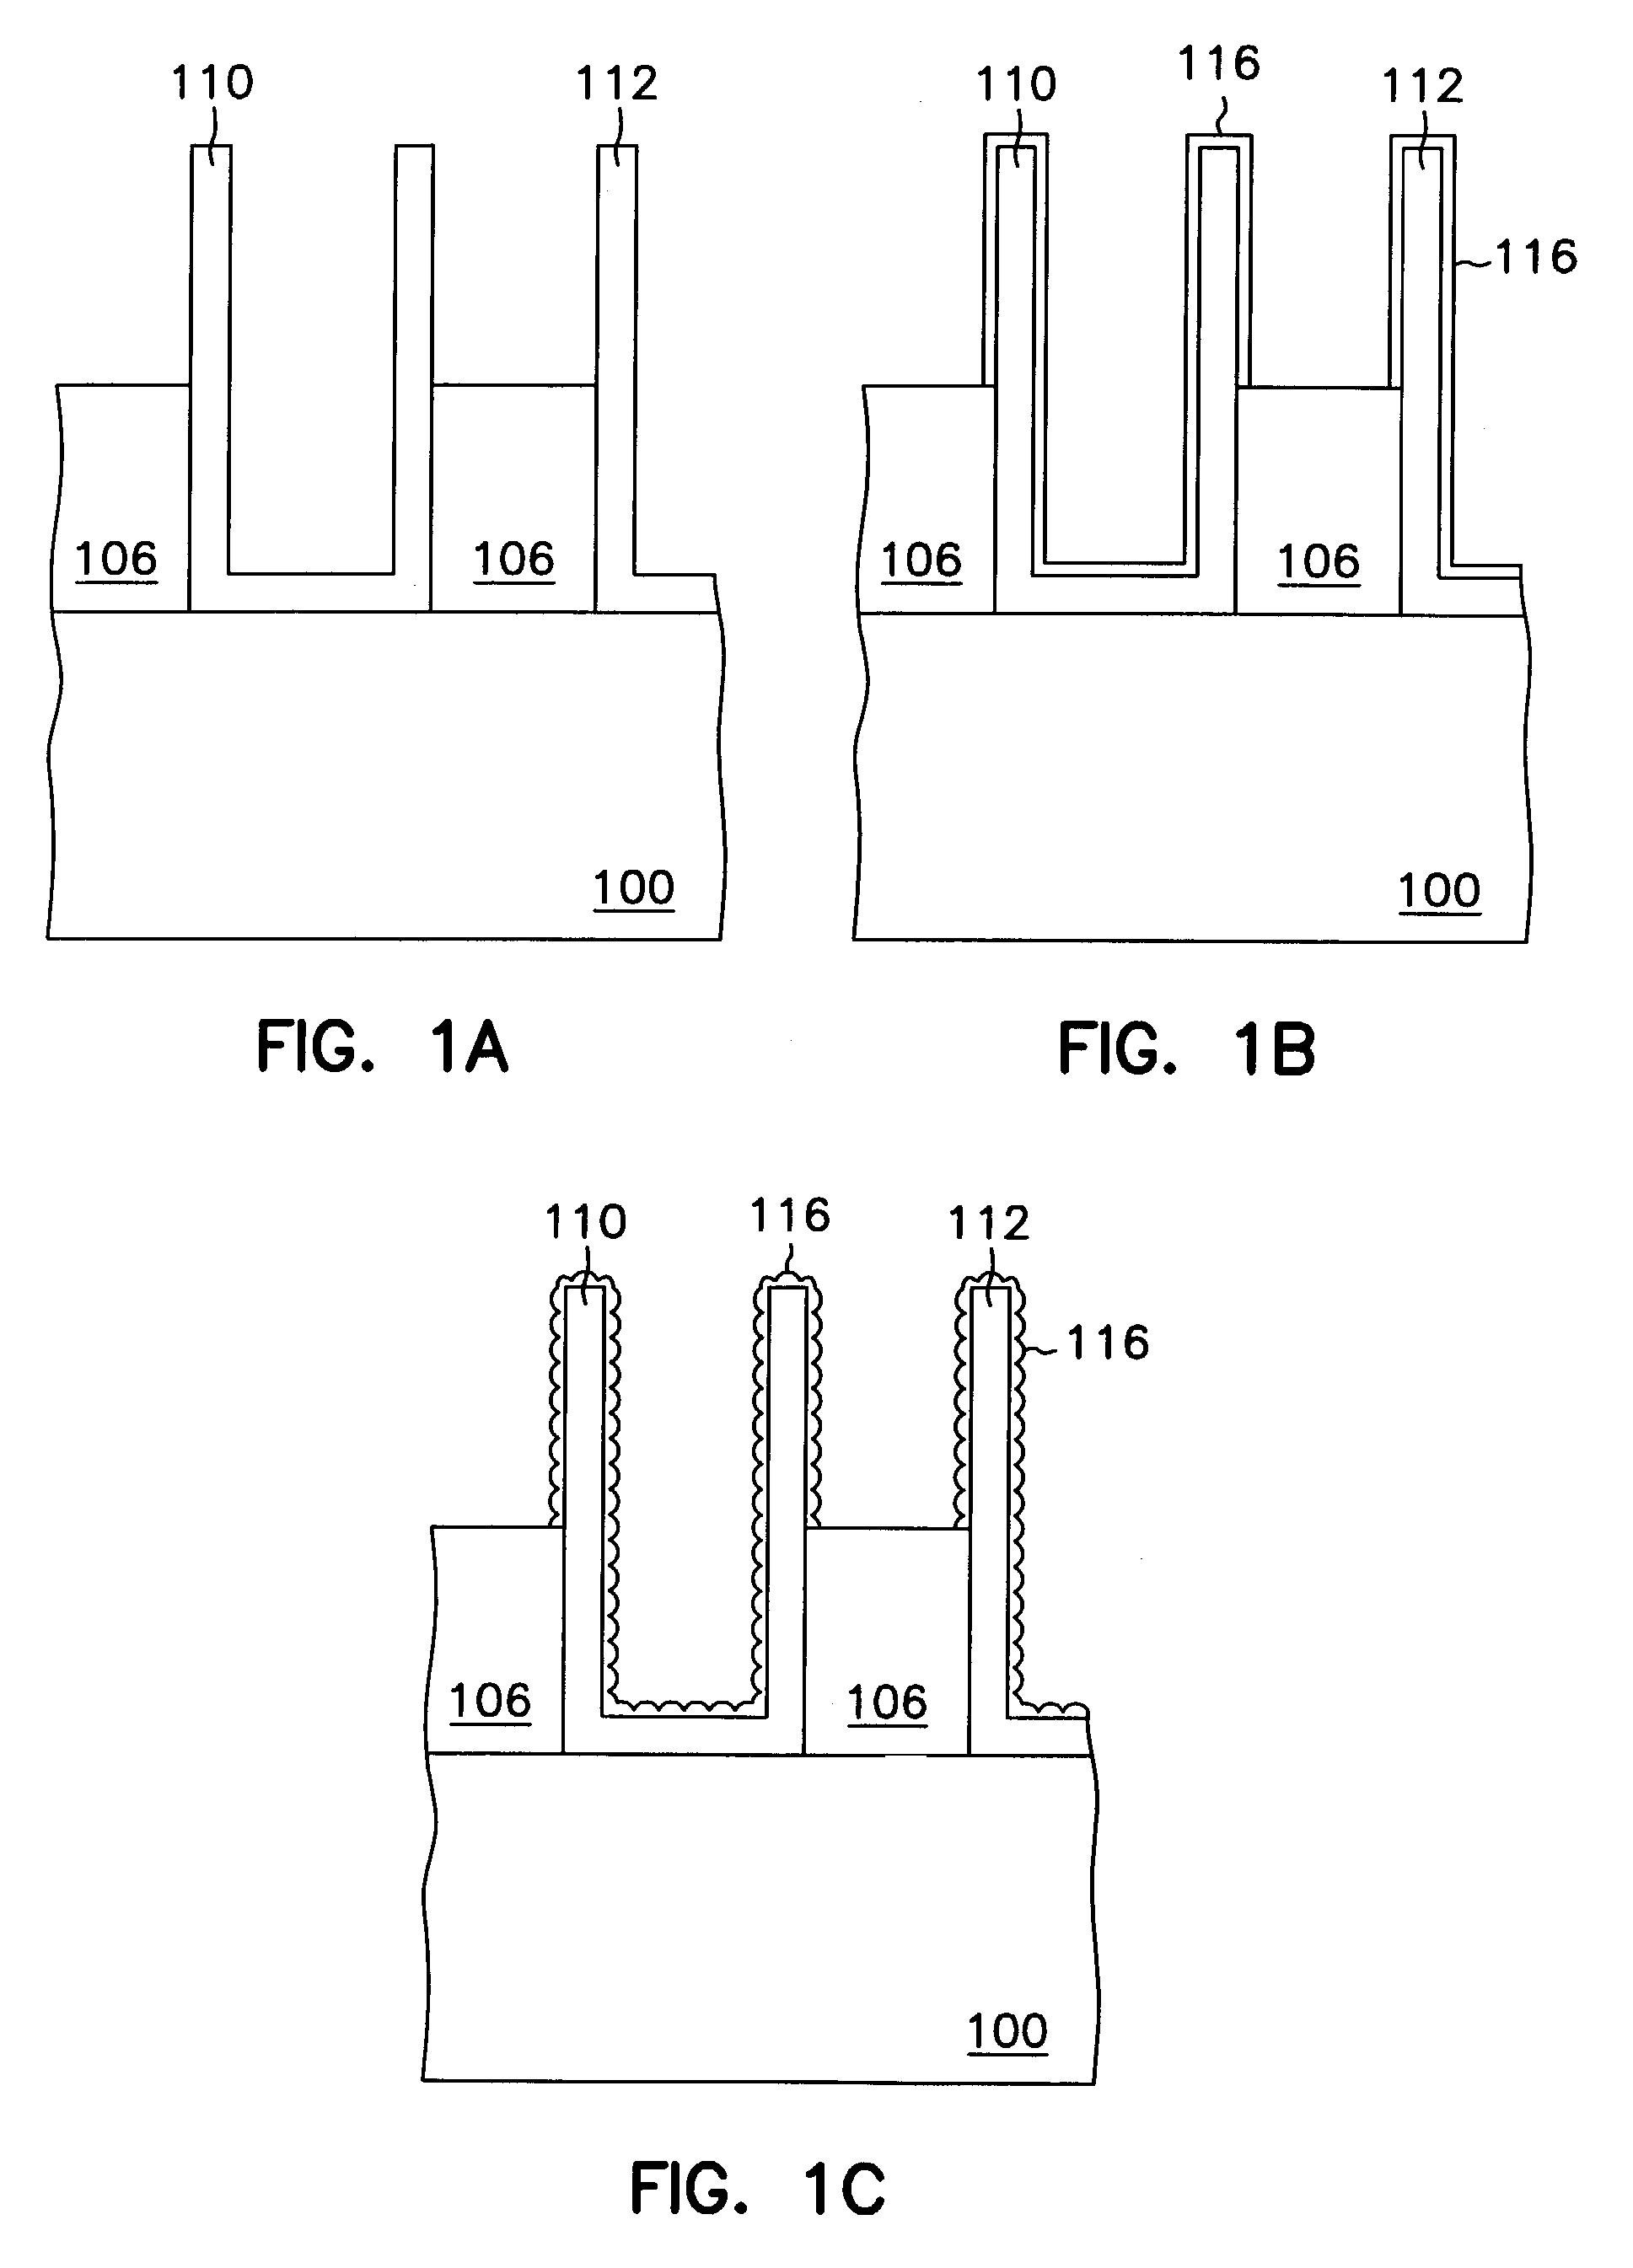 Forming integrated circuits using selective deposition of undoped silicon film seeded in chlorine and hydride gas